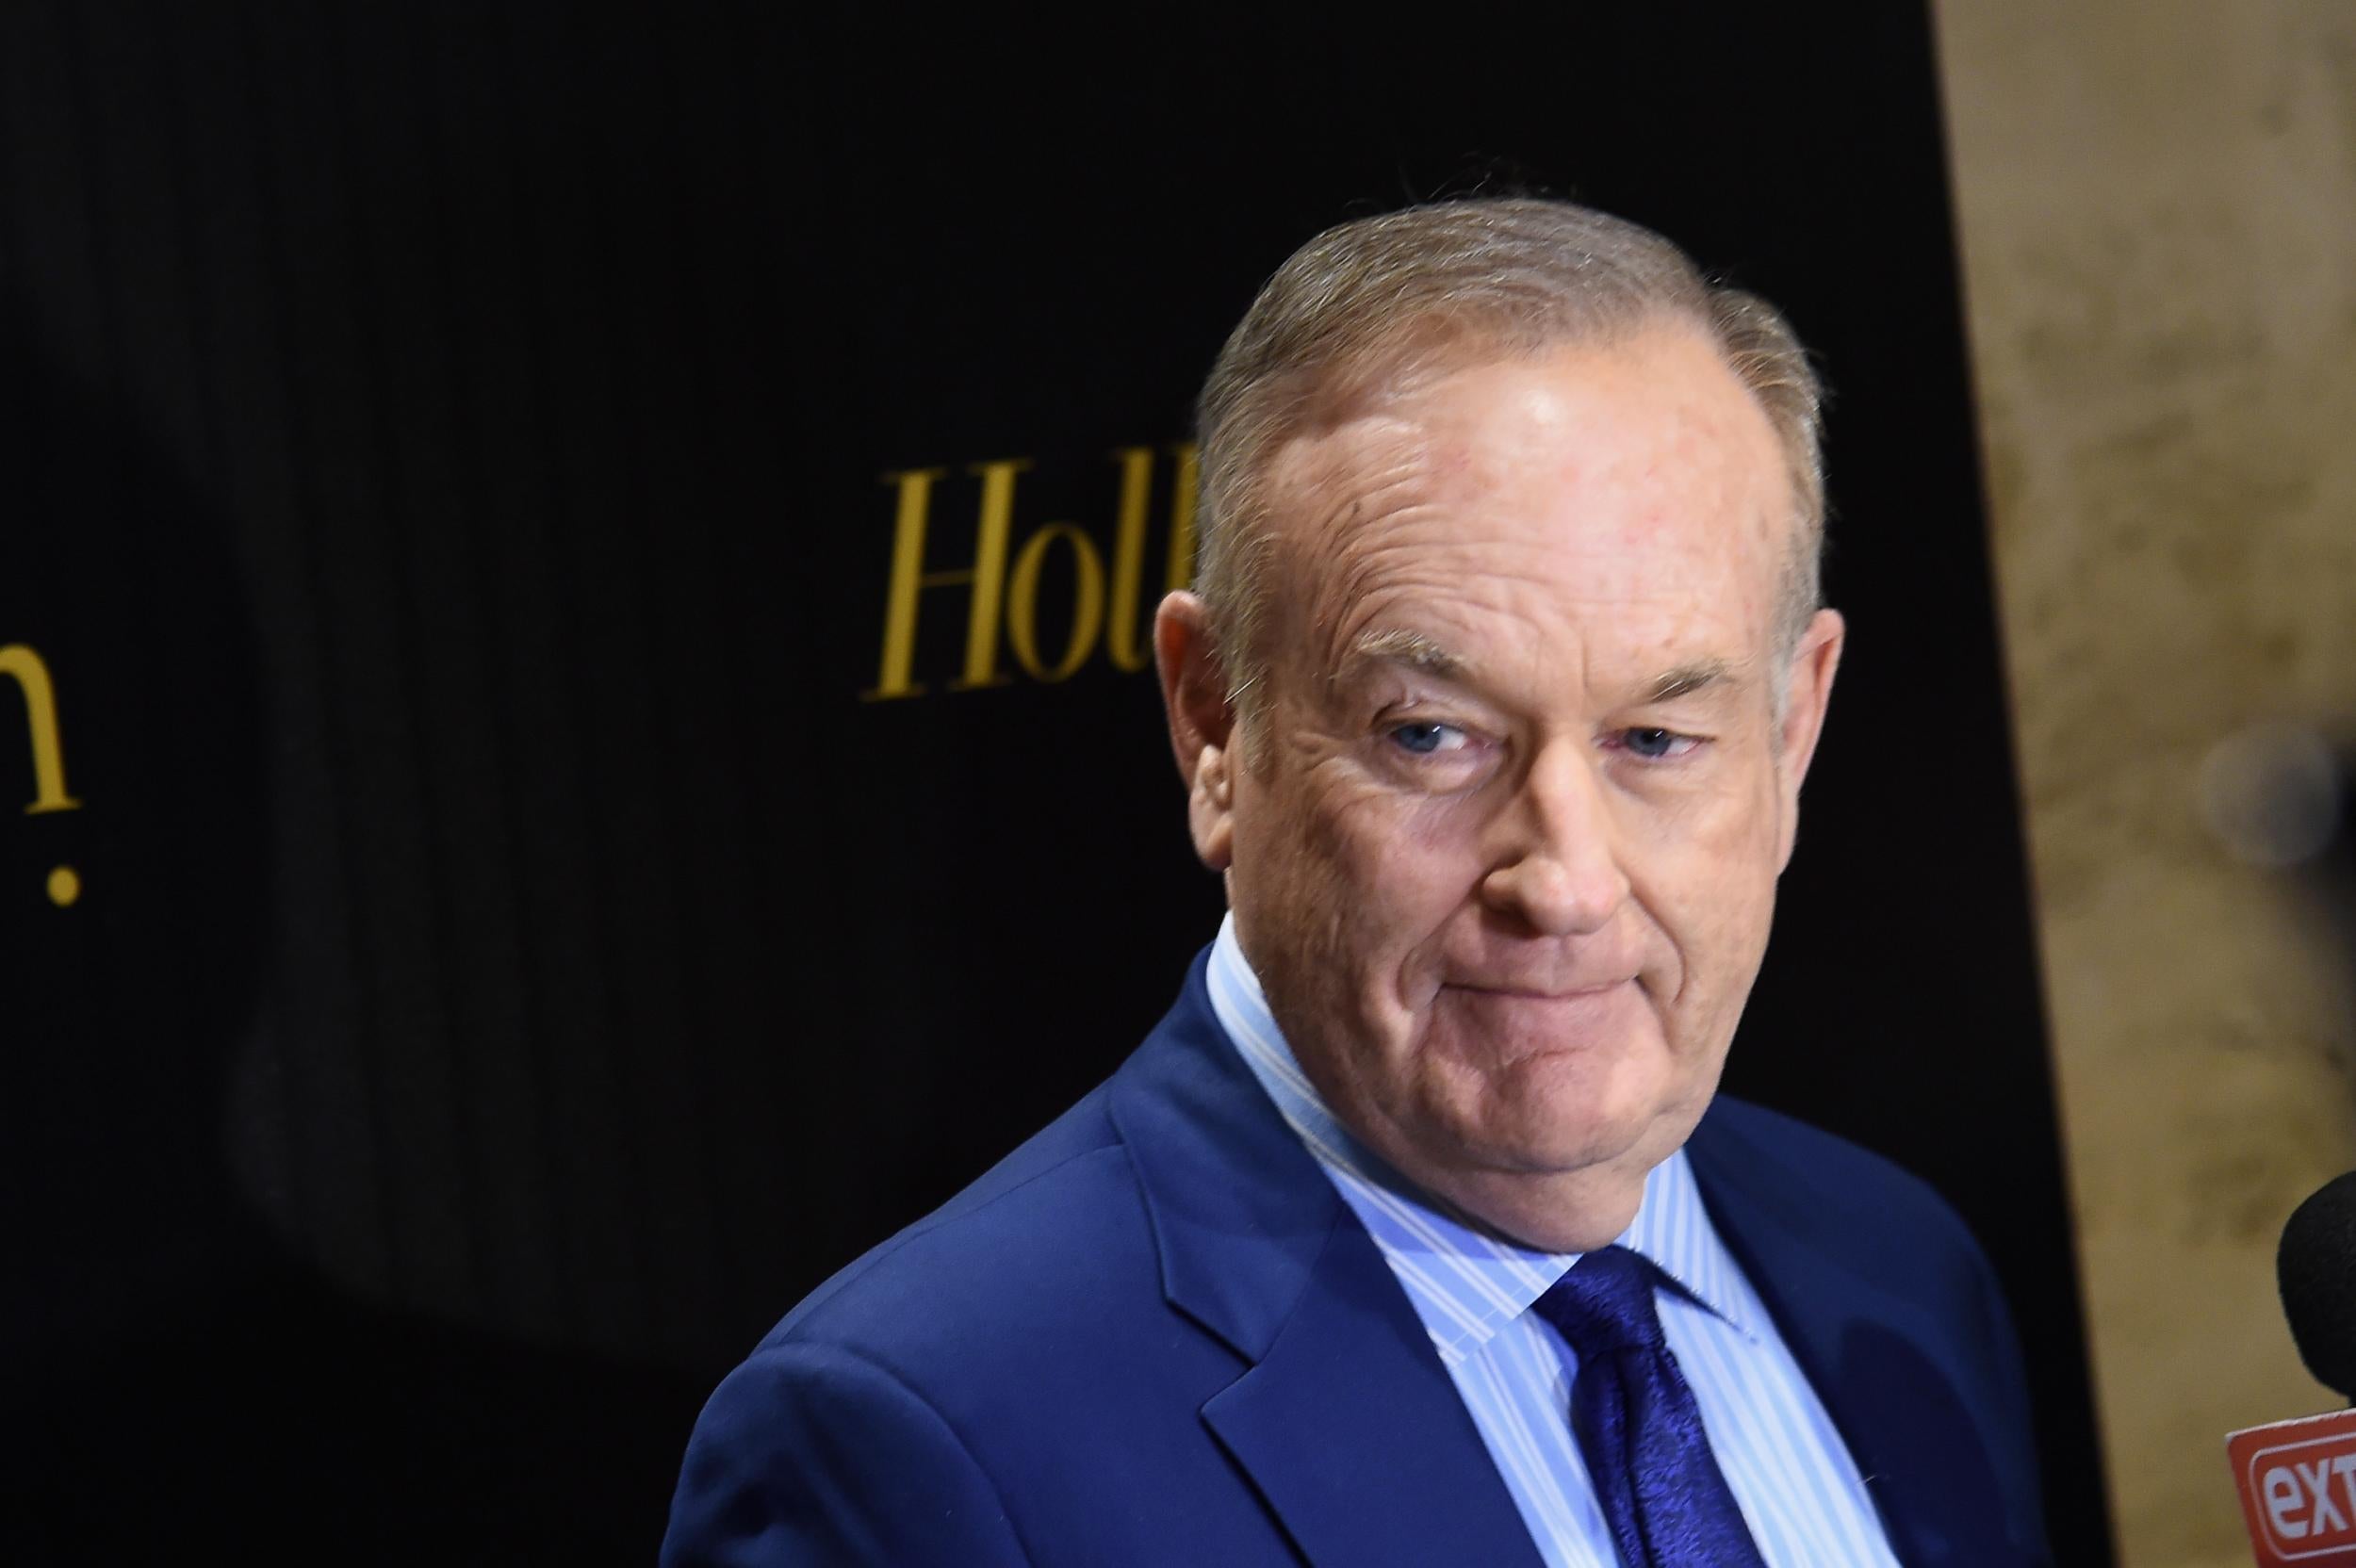 Bill O'Reilly's honorary degree from Marist College has been revoked